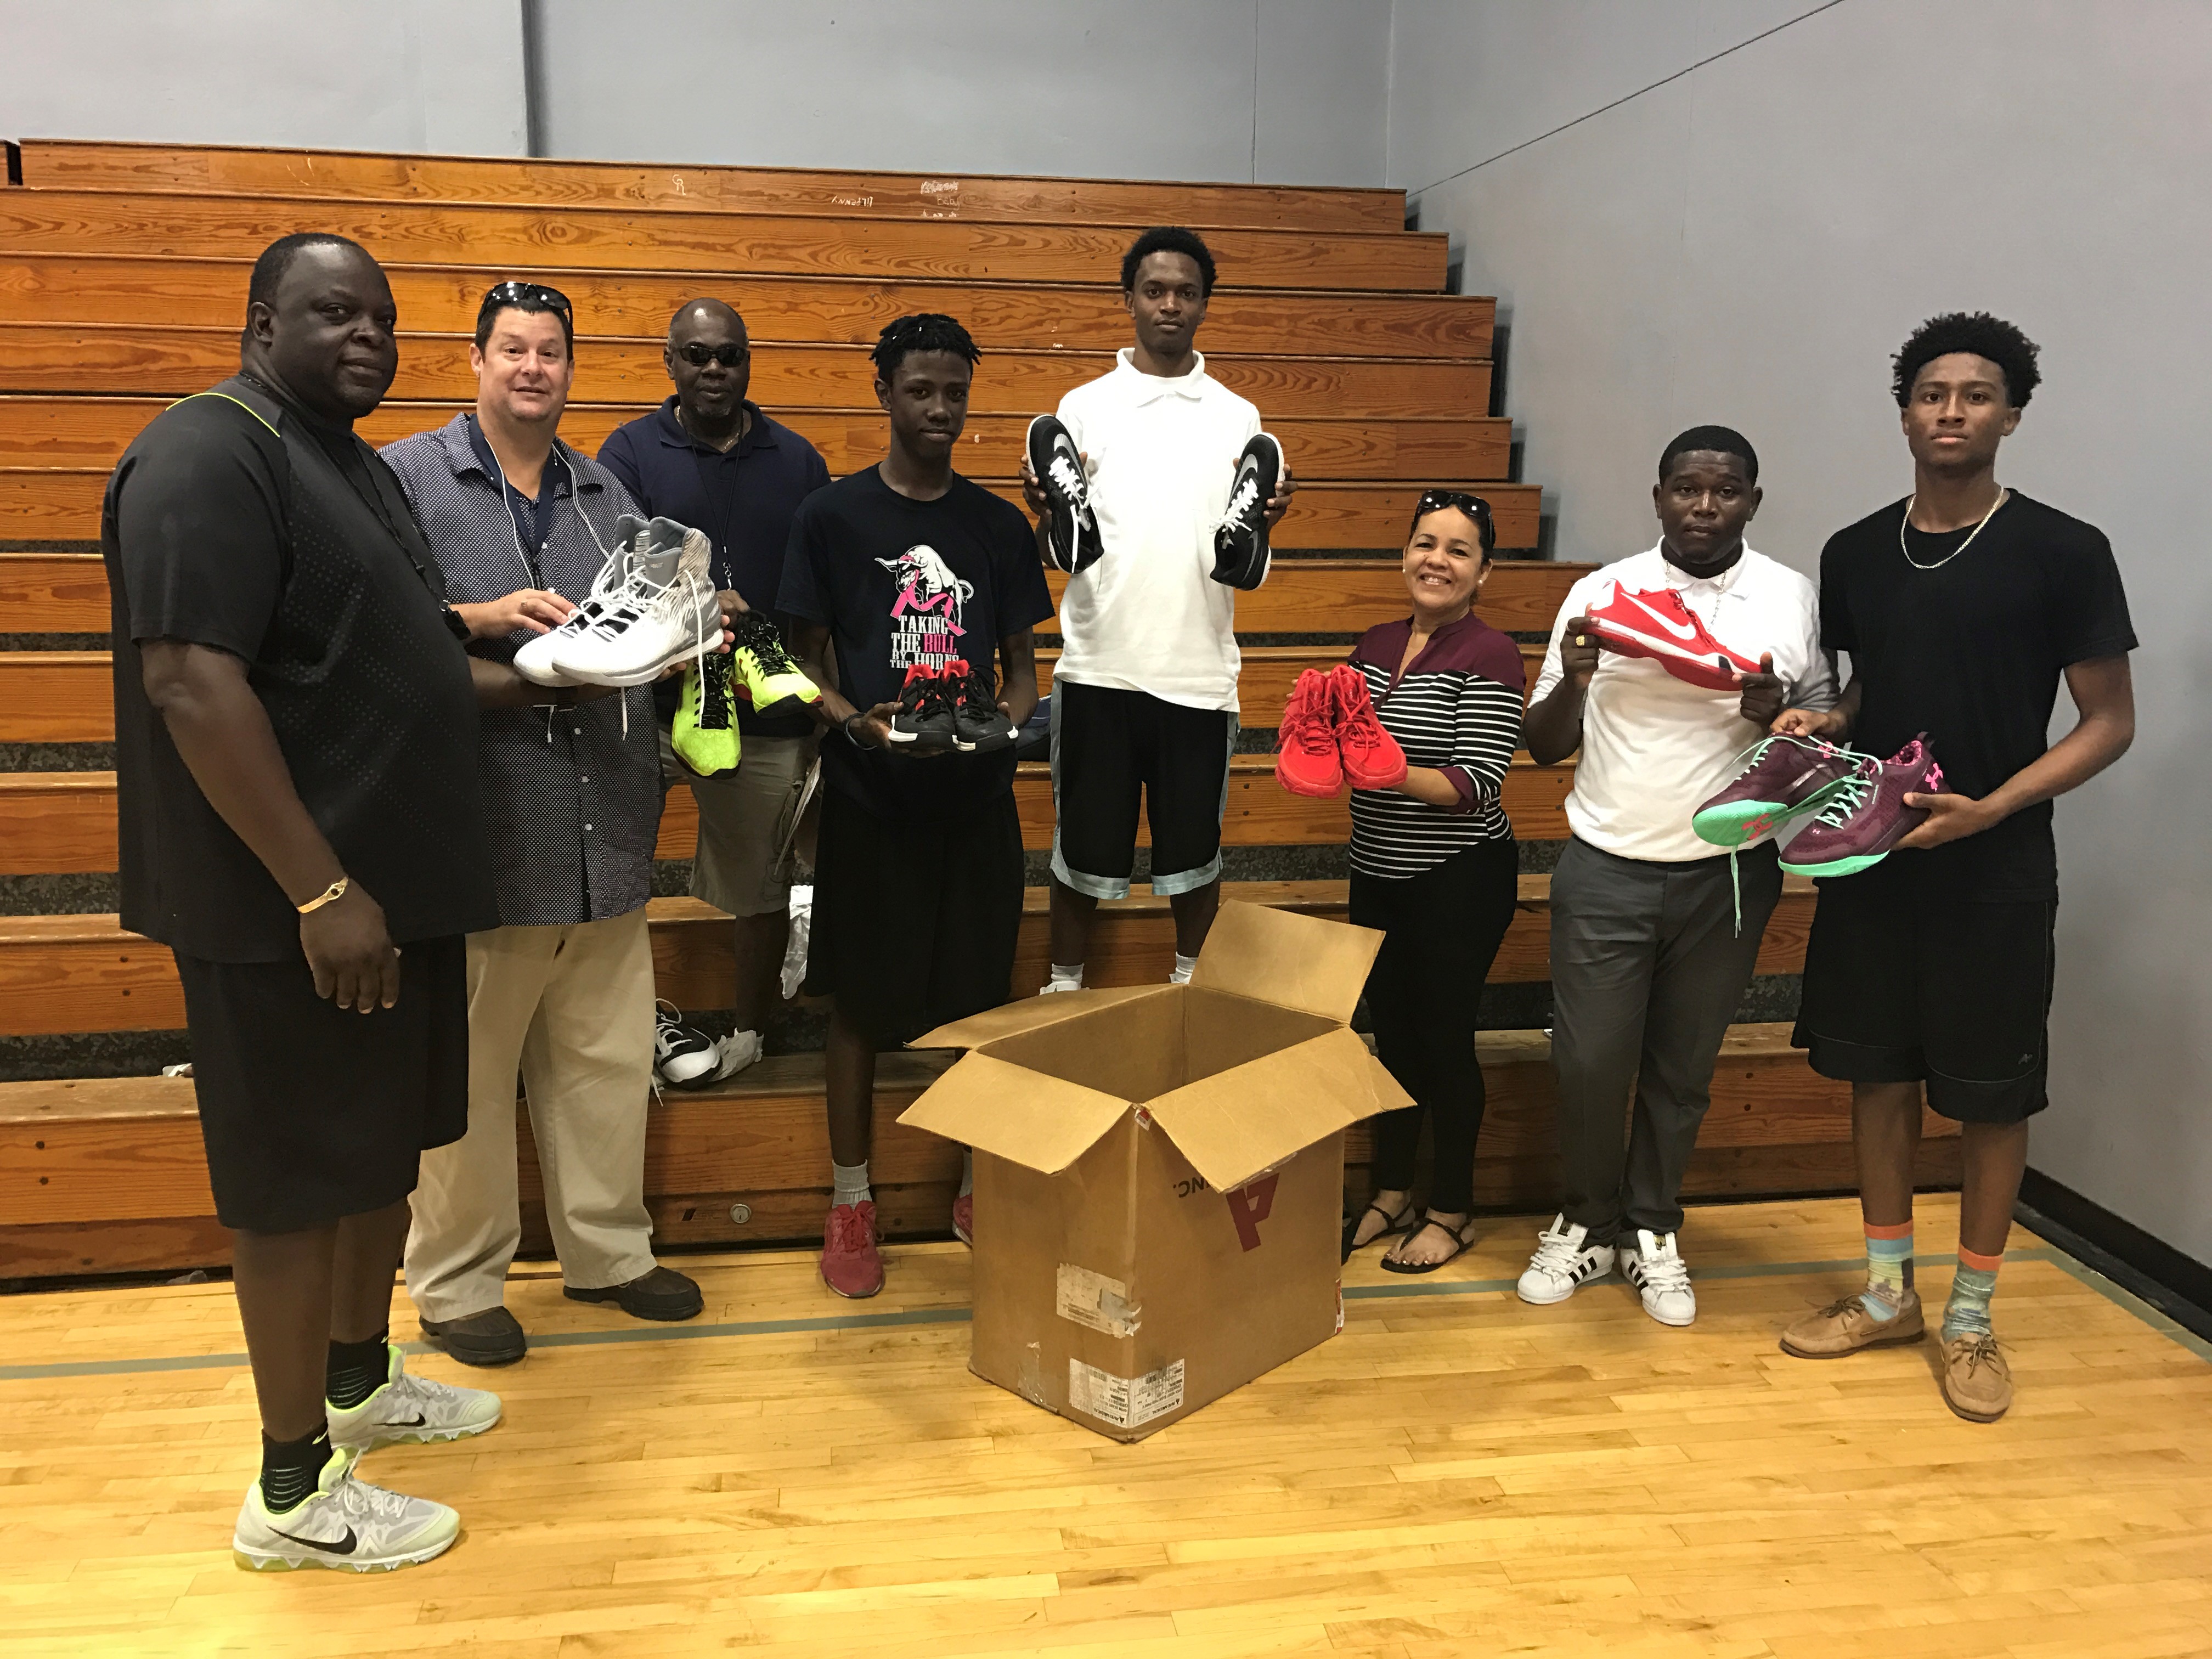 Donations of sneakers were given to V.I. students.